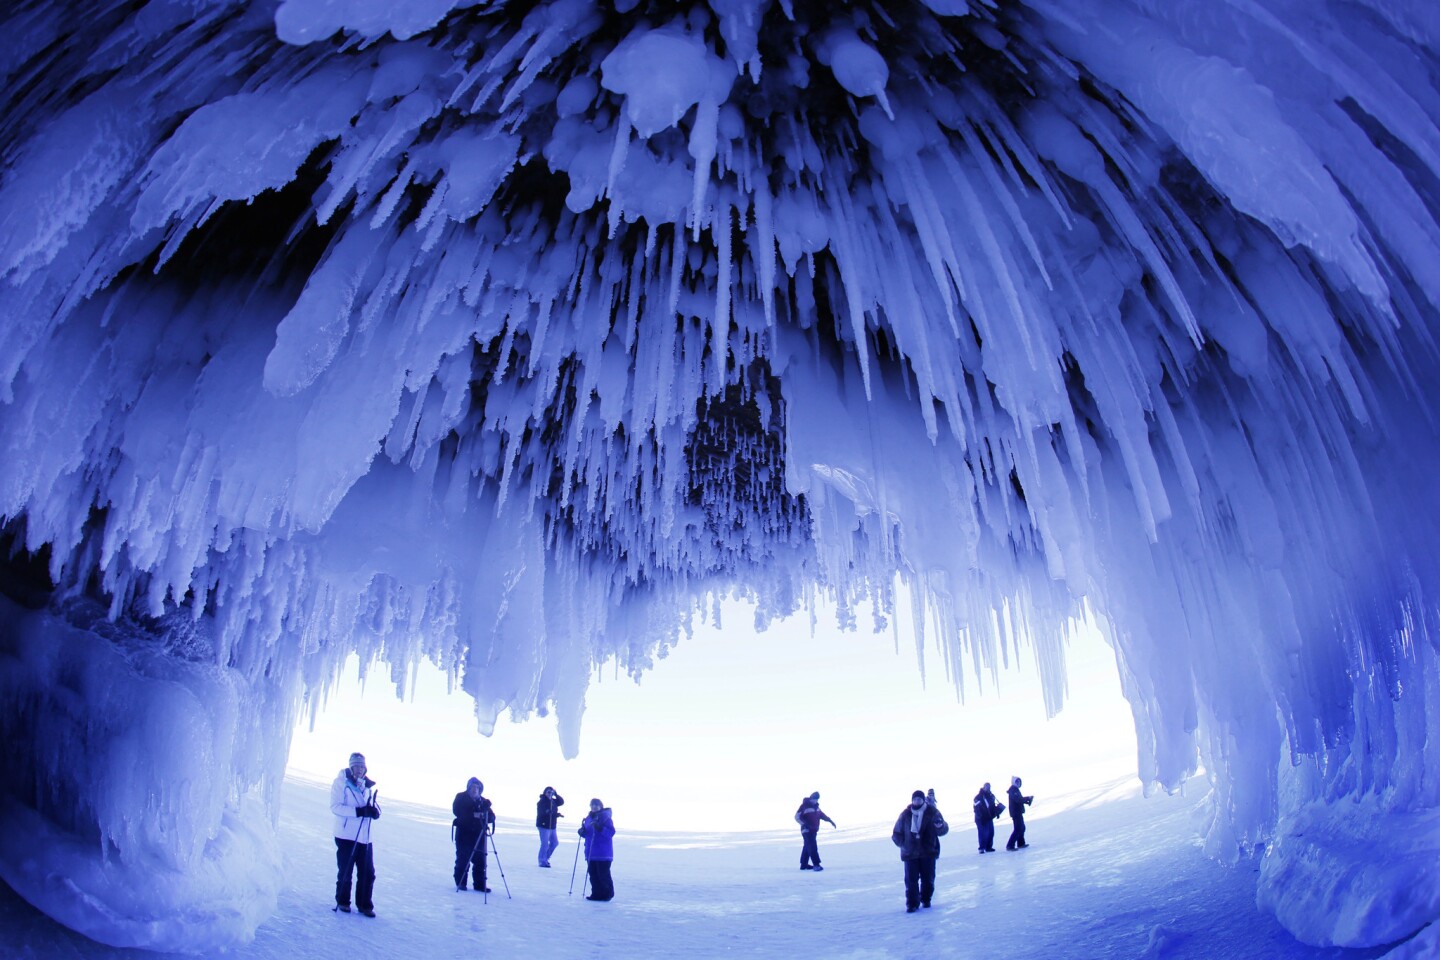 Mother Nature has become a Chihuly-like sculptress in sea caves along Lake Superior in northern Wisconsin. Icicles hang by the thousands in caves at Apostle Islands National Lakeshore. In warmer weather, the caves would be accessible only by water, but during this consistently cold winter, they are accessible by frozen lakeshore.